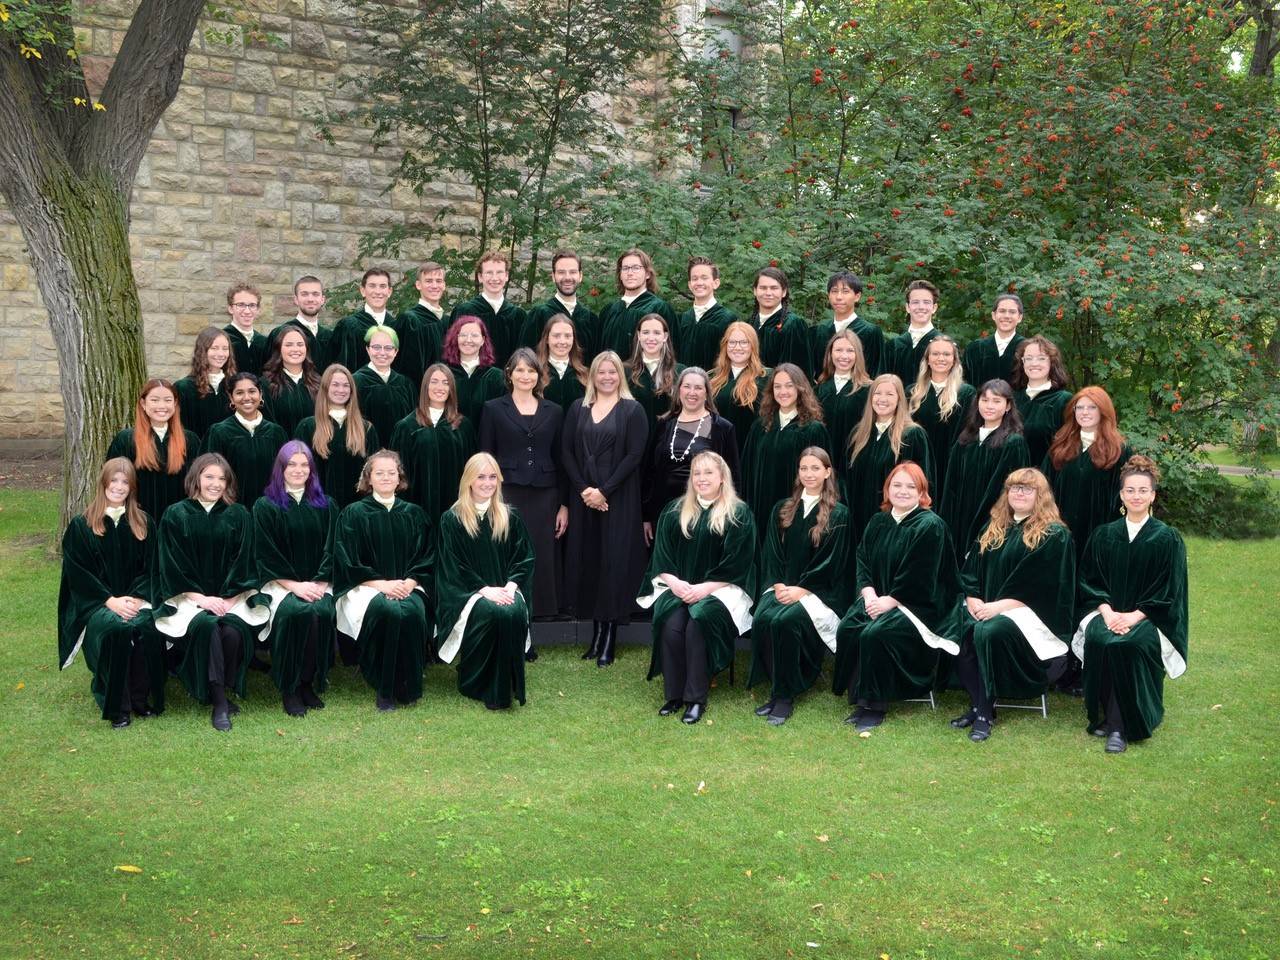 A group of people wearing dark green robes seated in choir formation